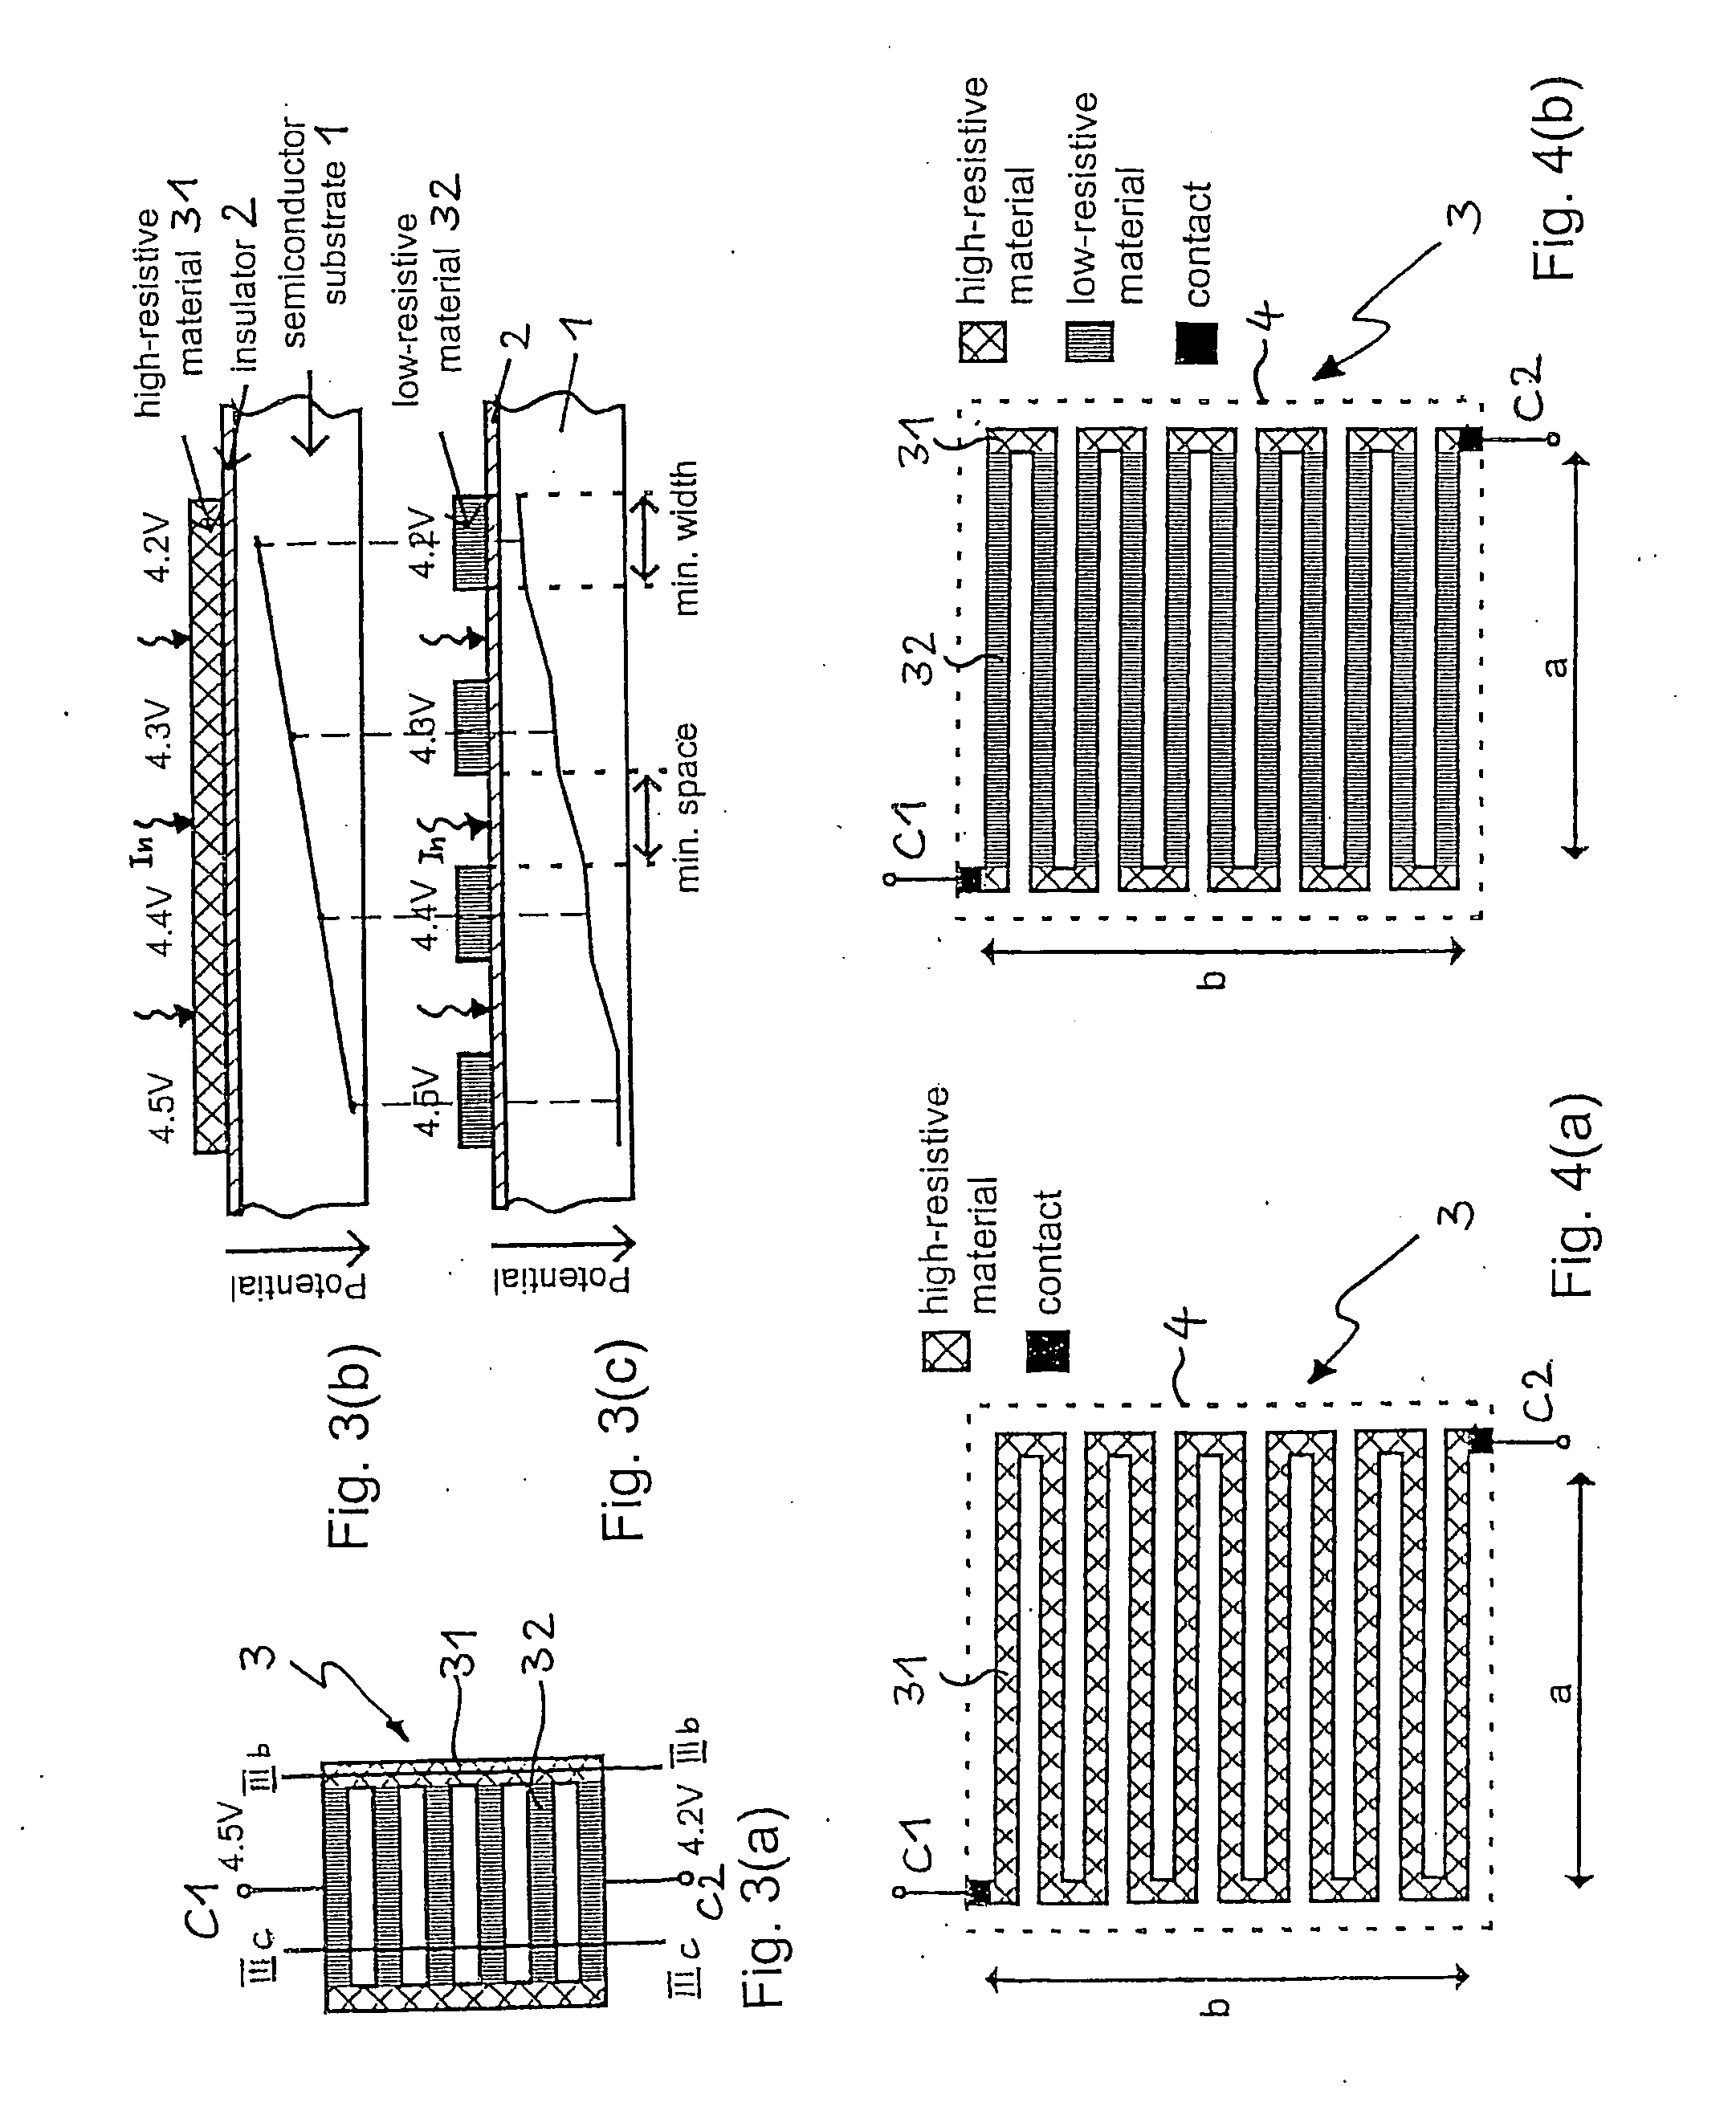 Large -area pixel for use in an image sensor